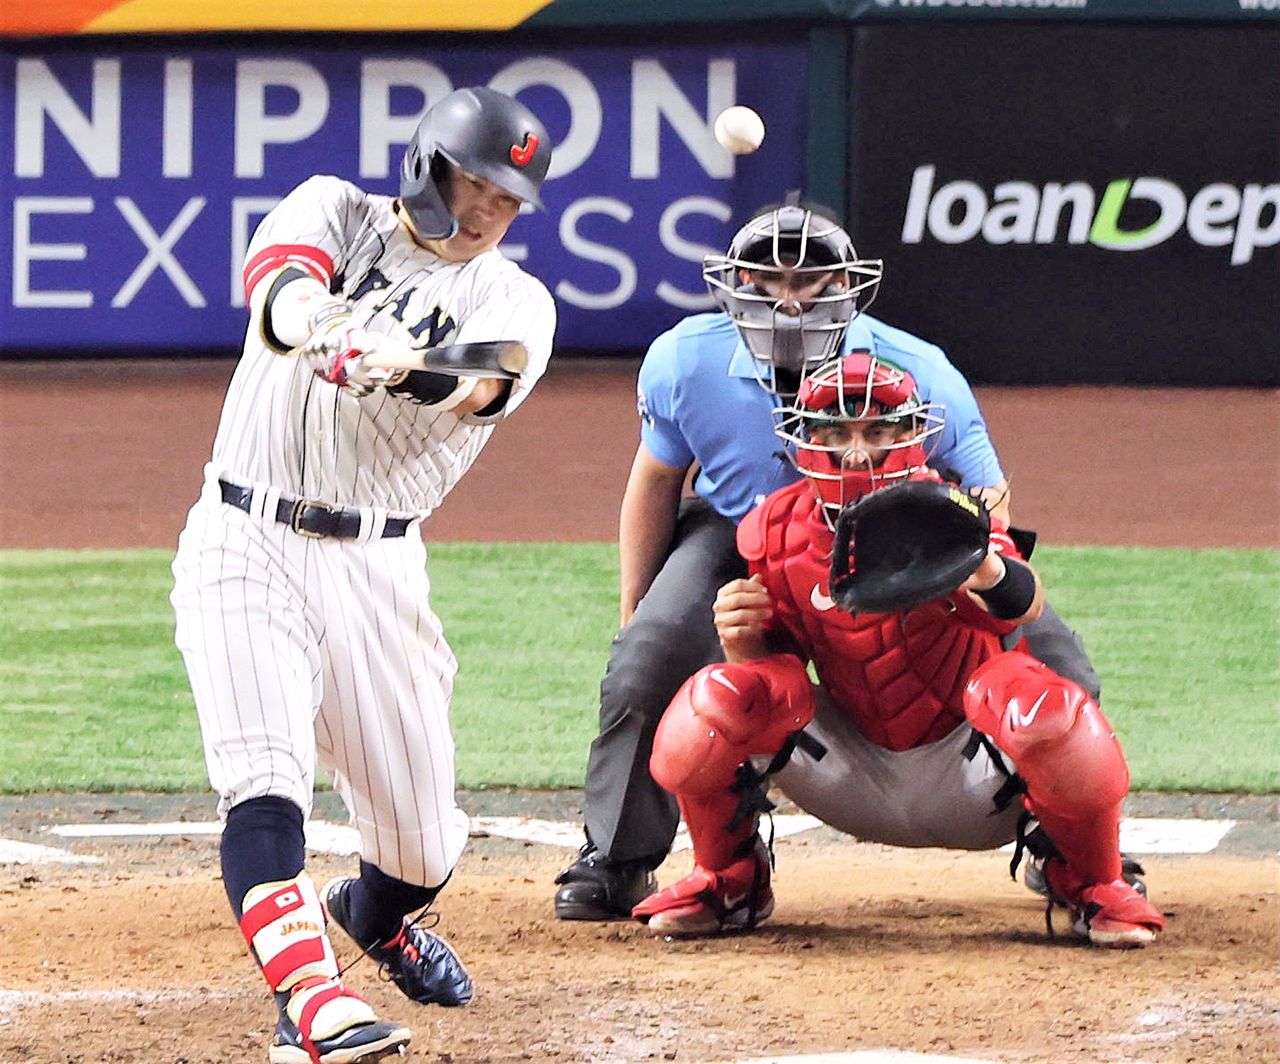 Murakami Munetaka hits a double to drive home the winning runs in the bottom of the ninth inning against Mexico on March 20, 2023, in Miami, Florida. (© Jiji)